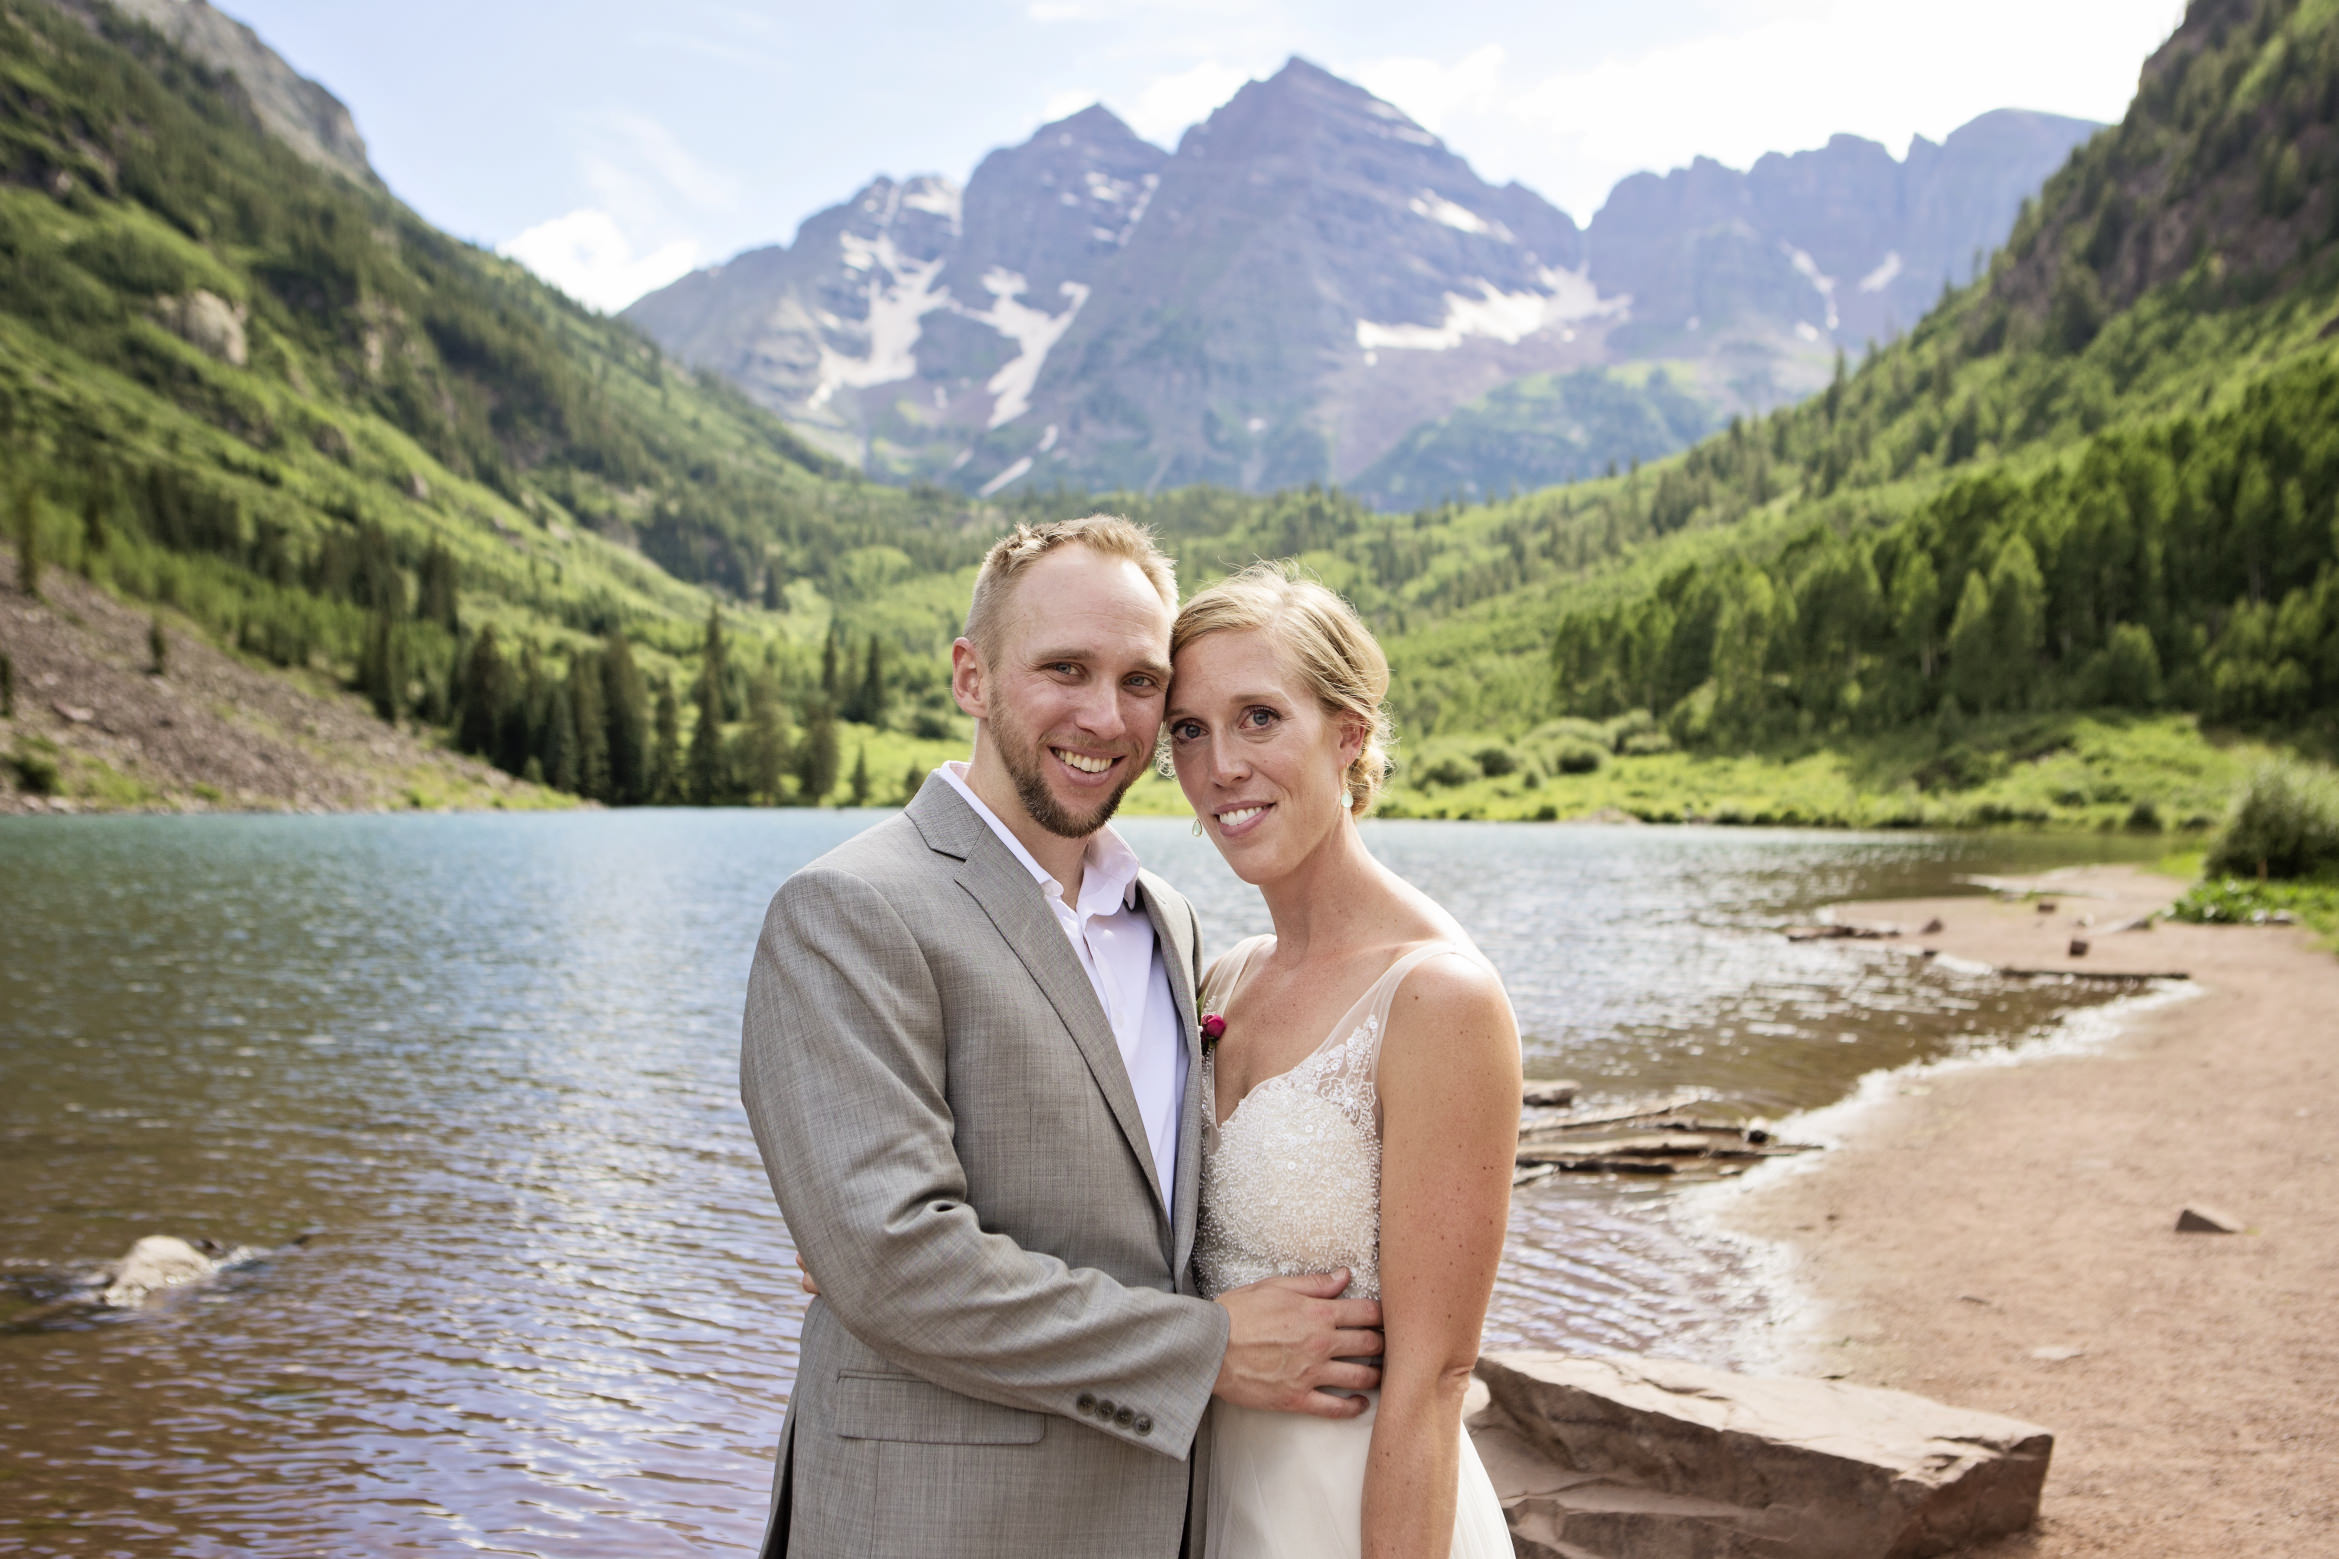 Wedding Photography in Aspen Colorado | Windfirm Photography